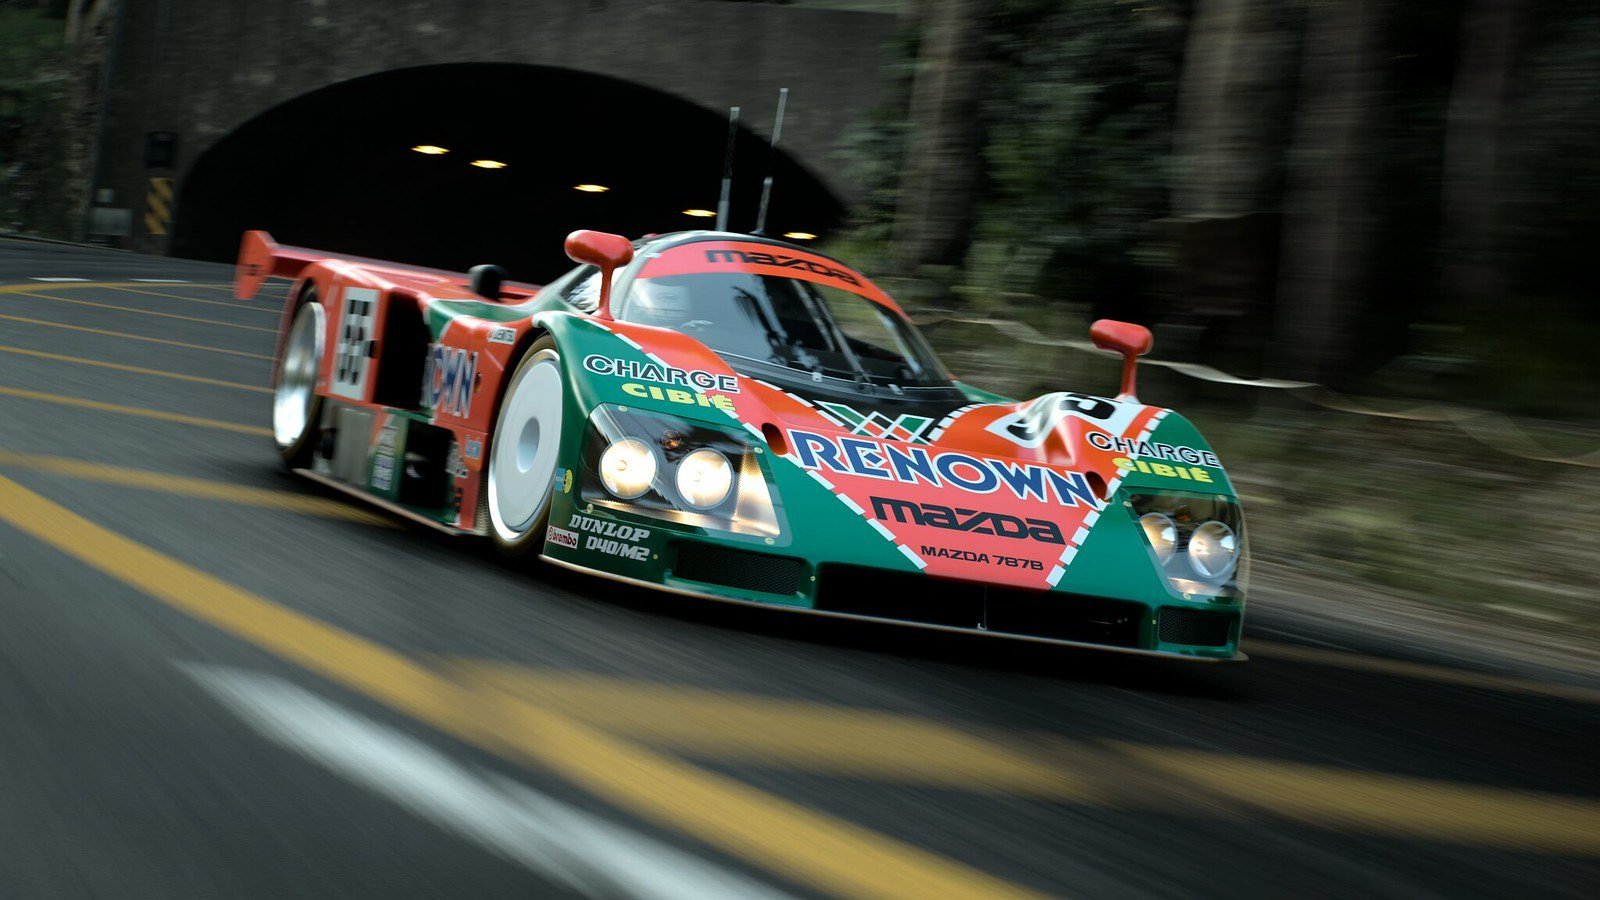 Gran Turismo 7 Patch 1.11 Available Now, Increases Rewards and Credit Cap